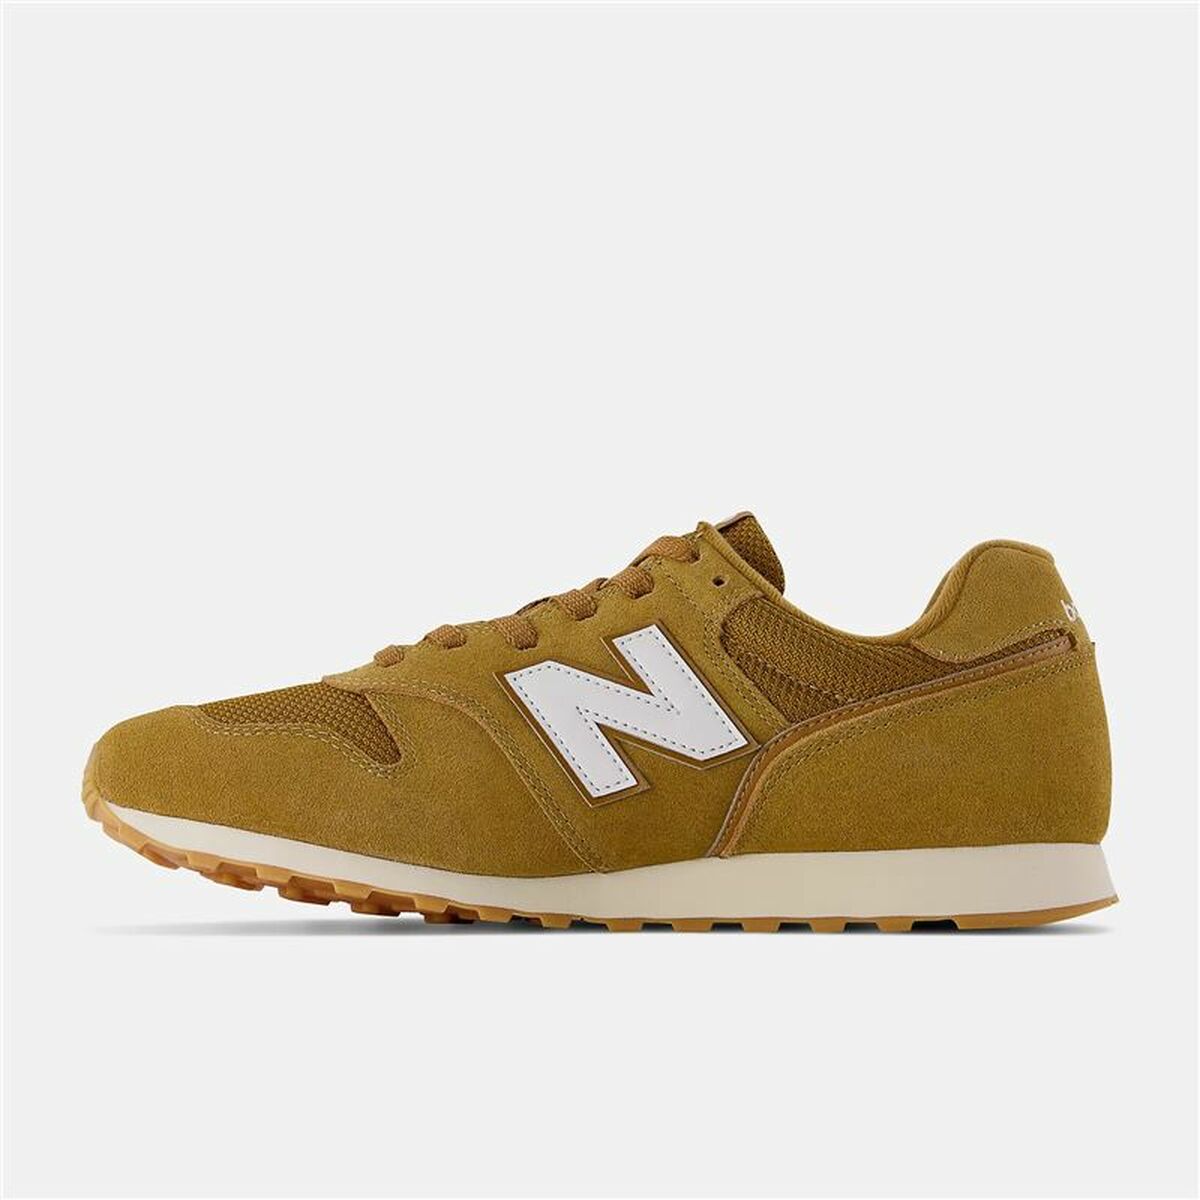 Men’s Casual Trainers New Balance 373 V2 Light brown